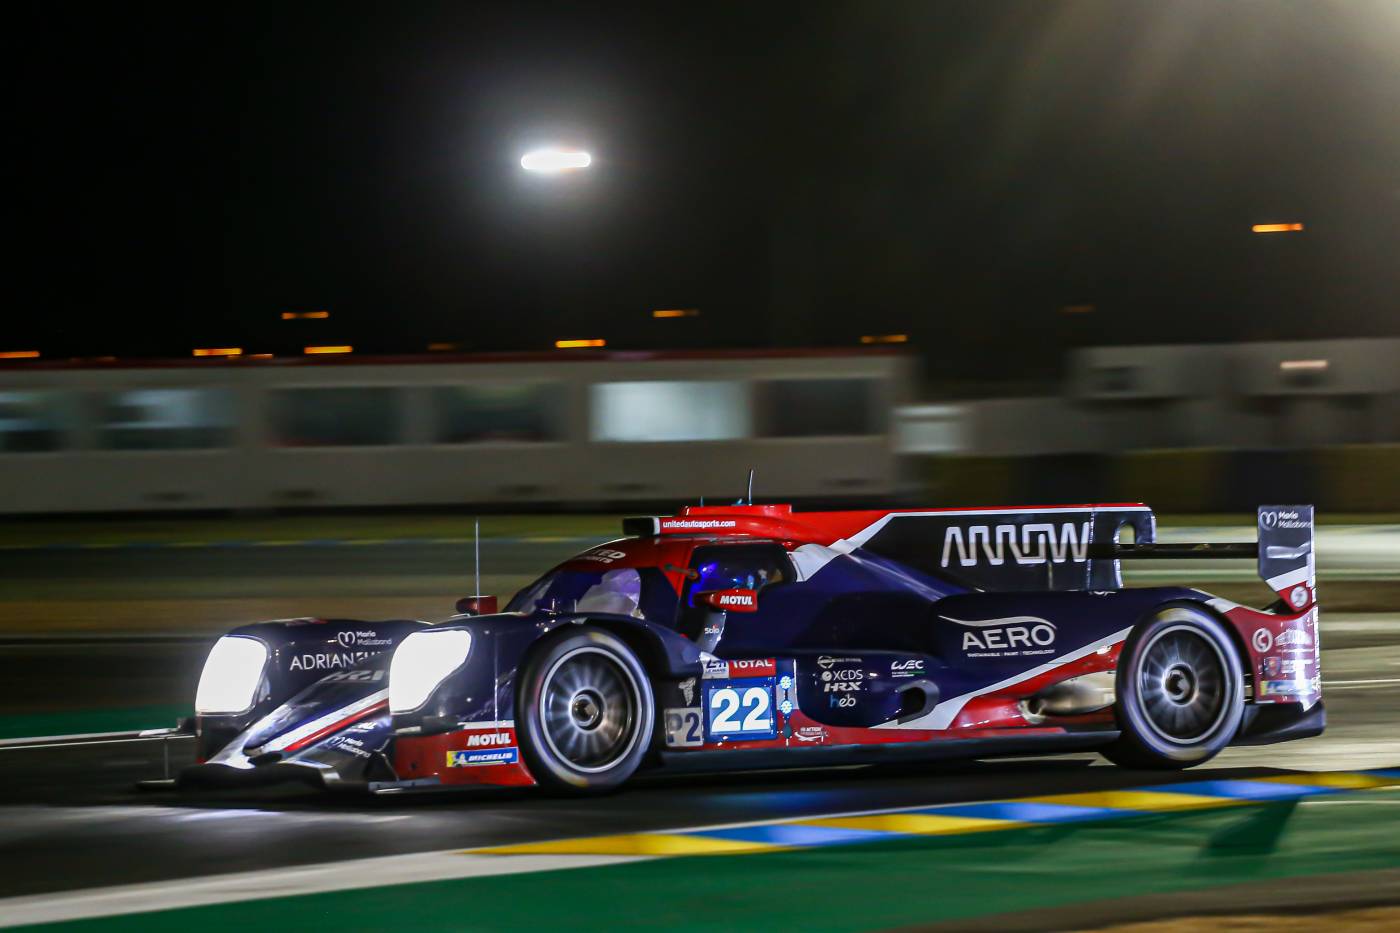 The United Autosports team’s ORECA 07 in the lead in the early morning